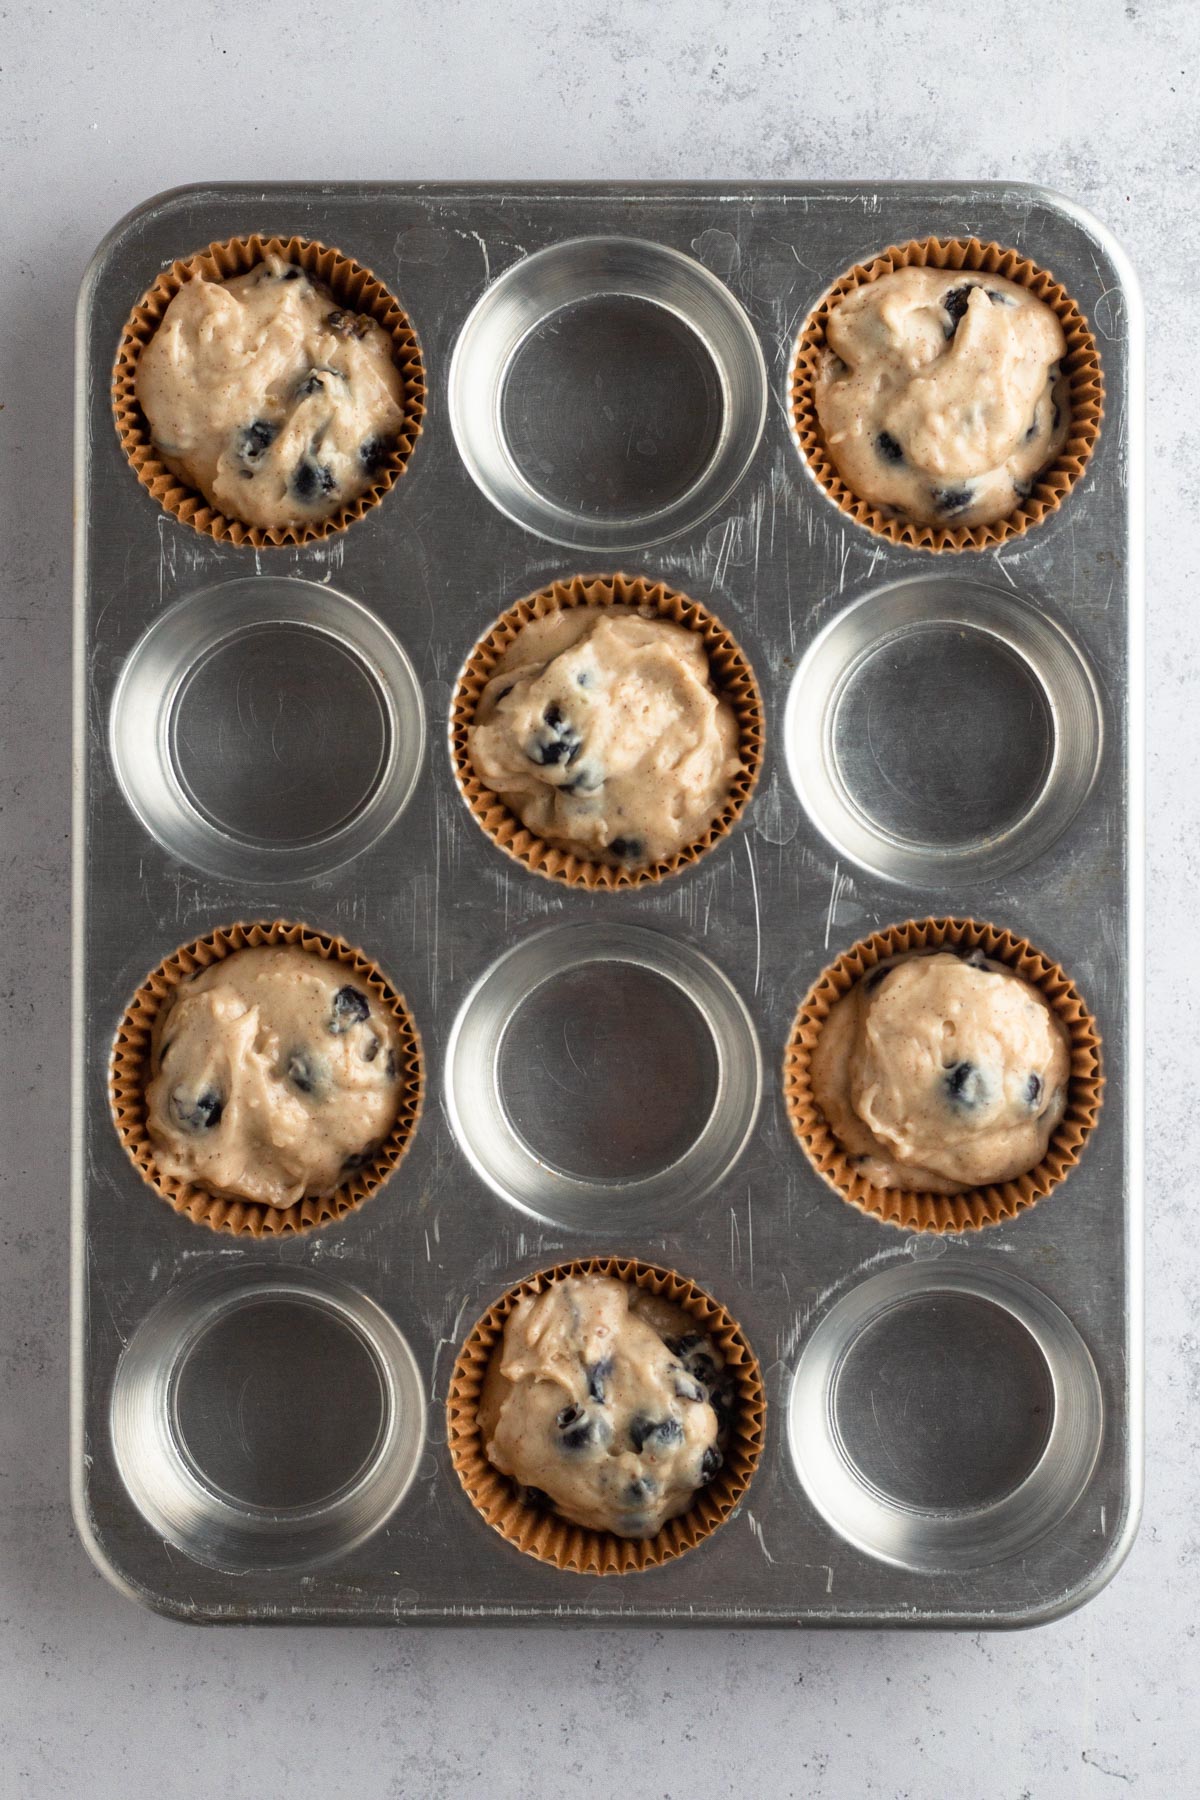 Muffin batter in brown paper liners in a metal muffin pan.